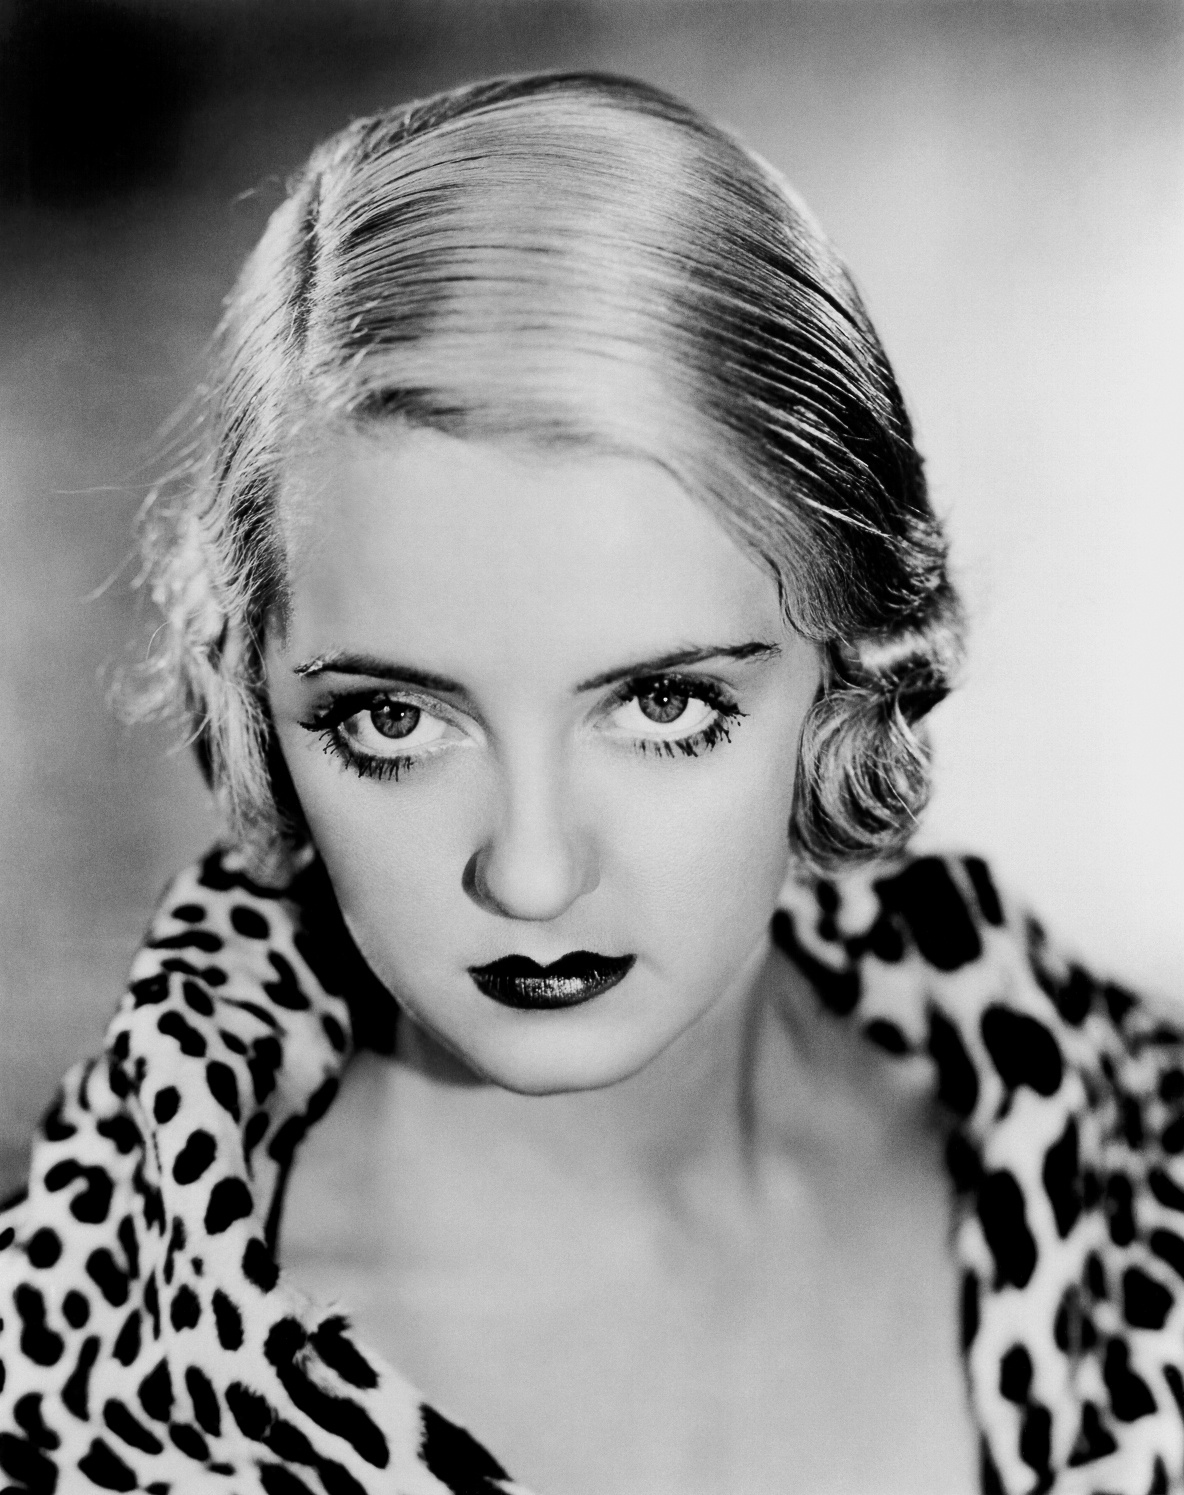 In 77, Bette Davis is 1st woman to receive American Film Institute's Life Achievement Award.